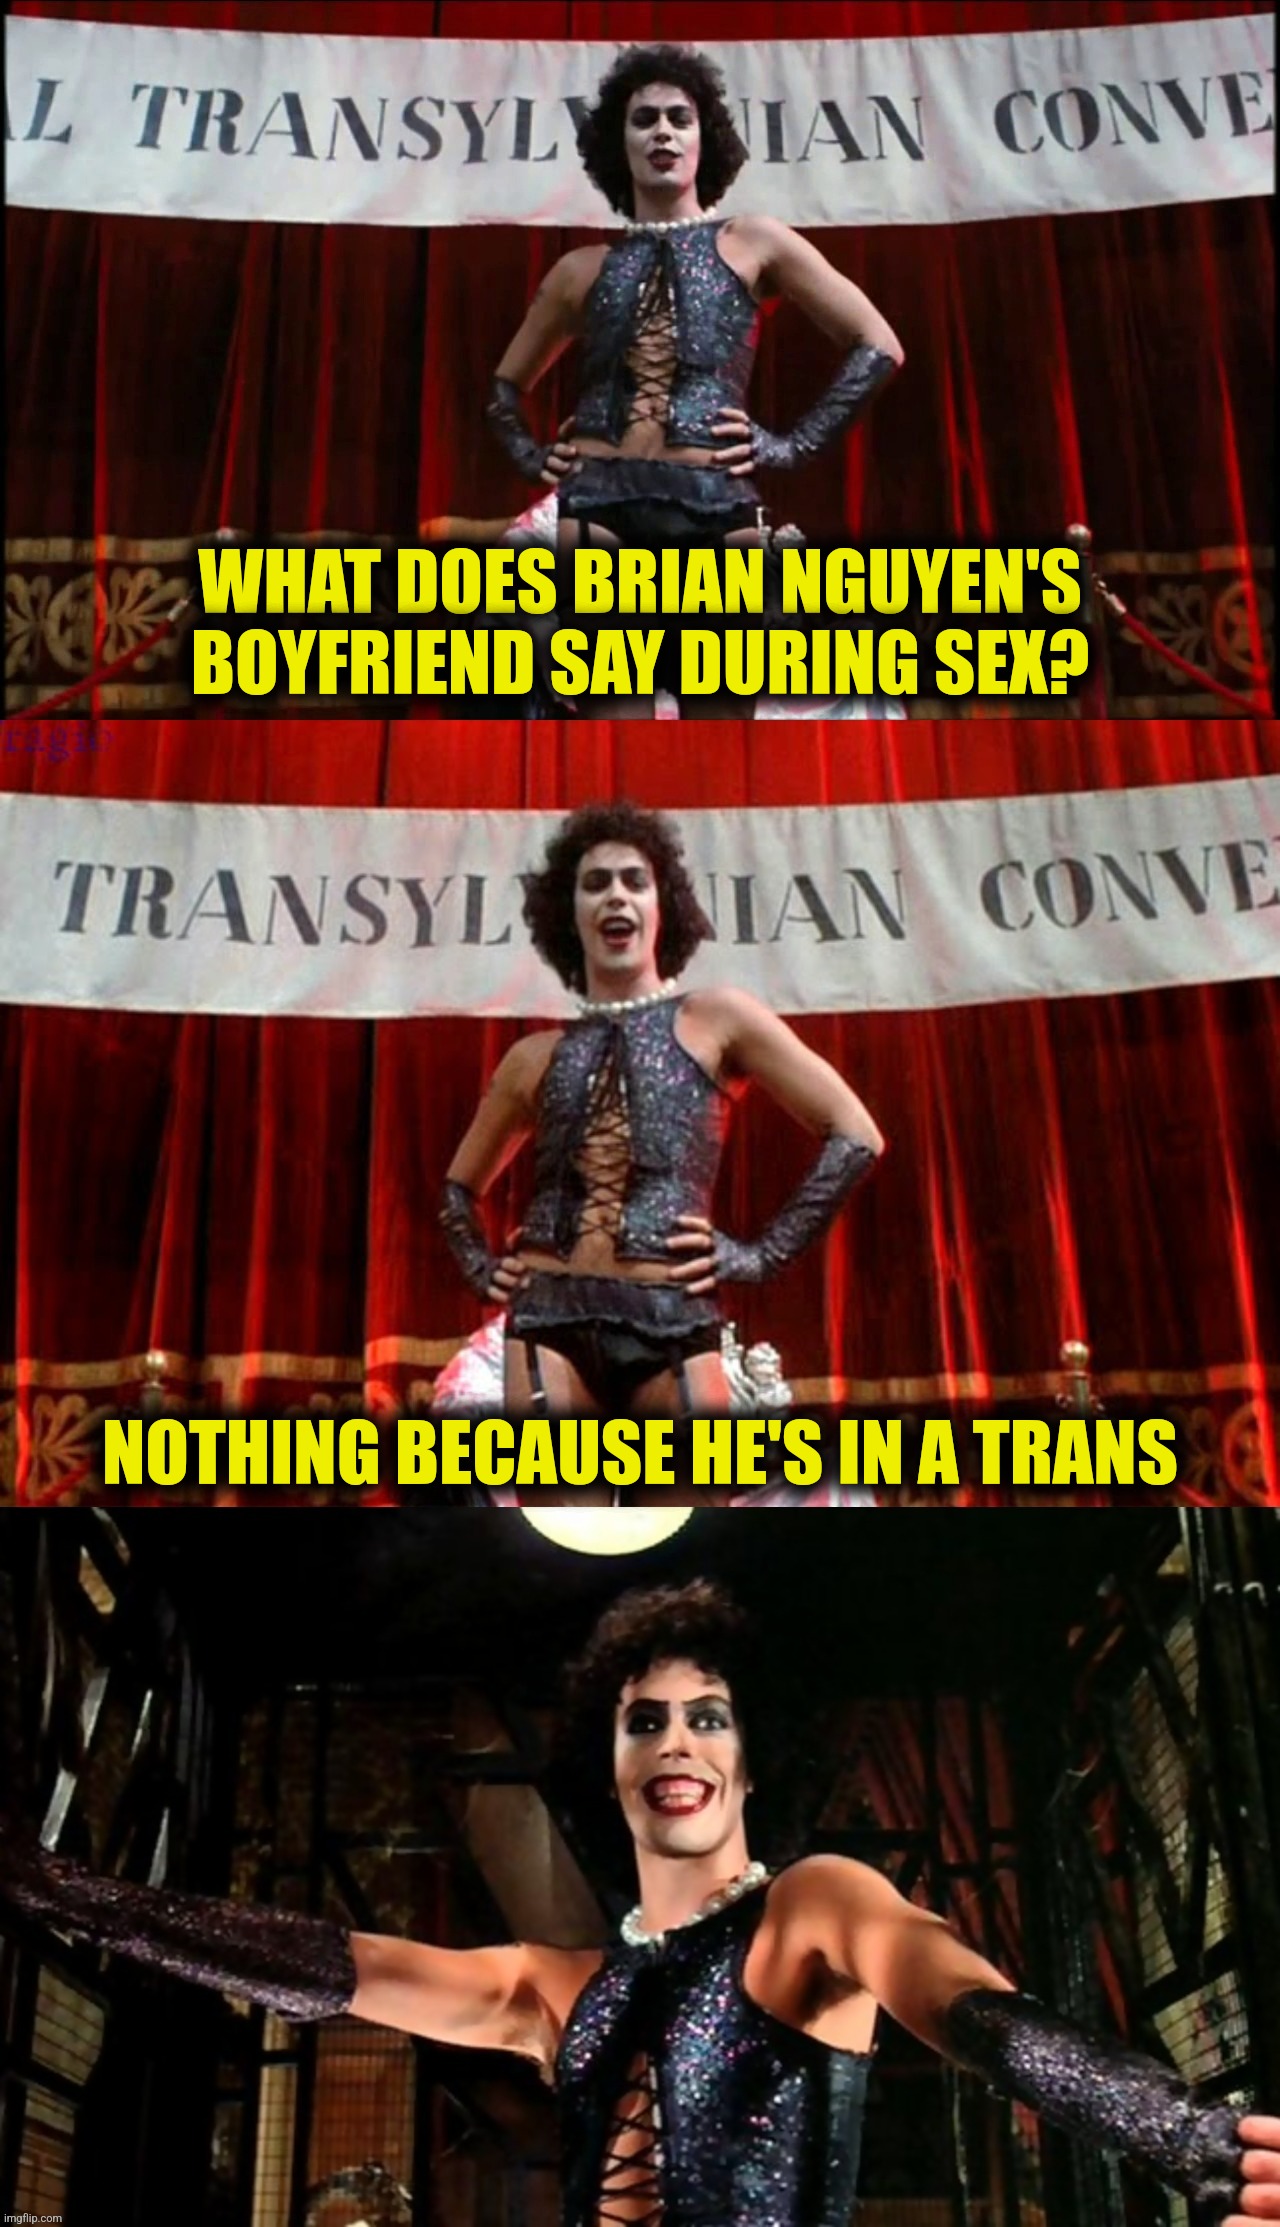 WHAT DOES BRIAN NGUYEN'S BOYFRIEND SAY DURING SEX? NOTHING BECAUSE HE'S IN A TRANS | made w/ Imgflip meme maker